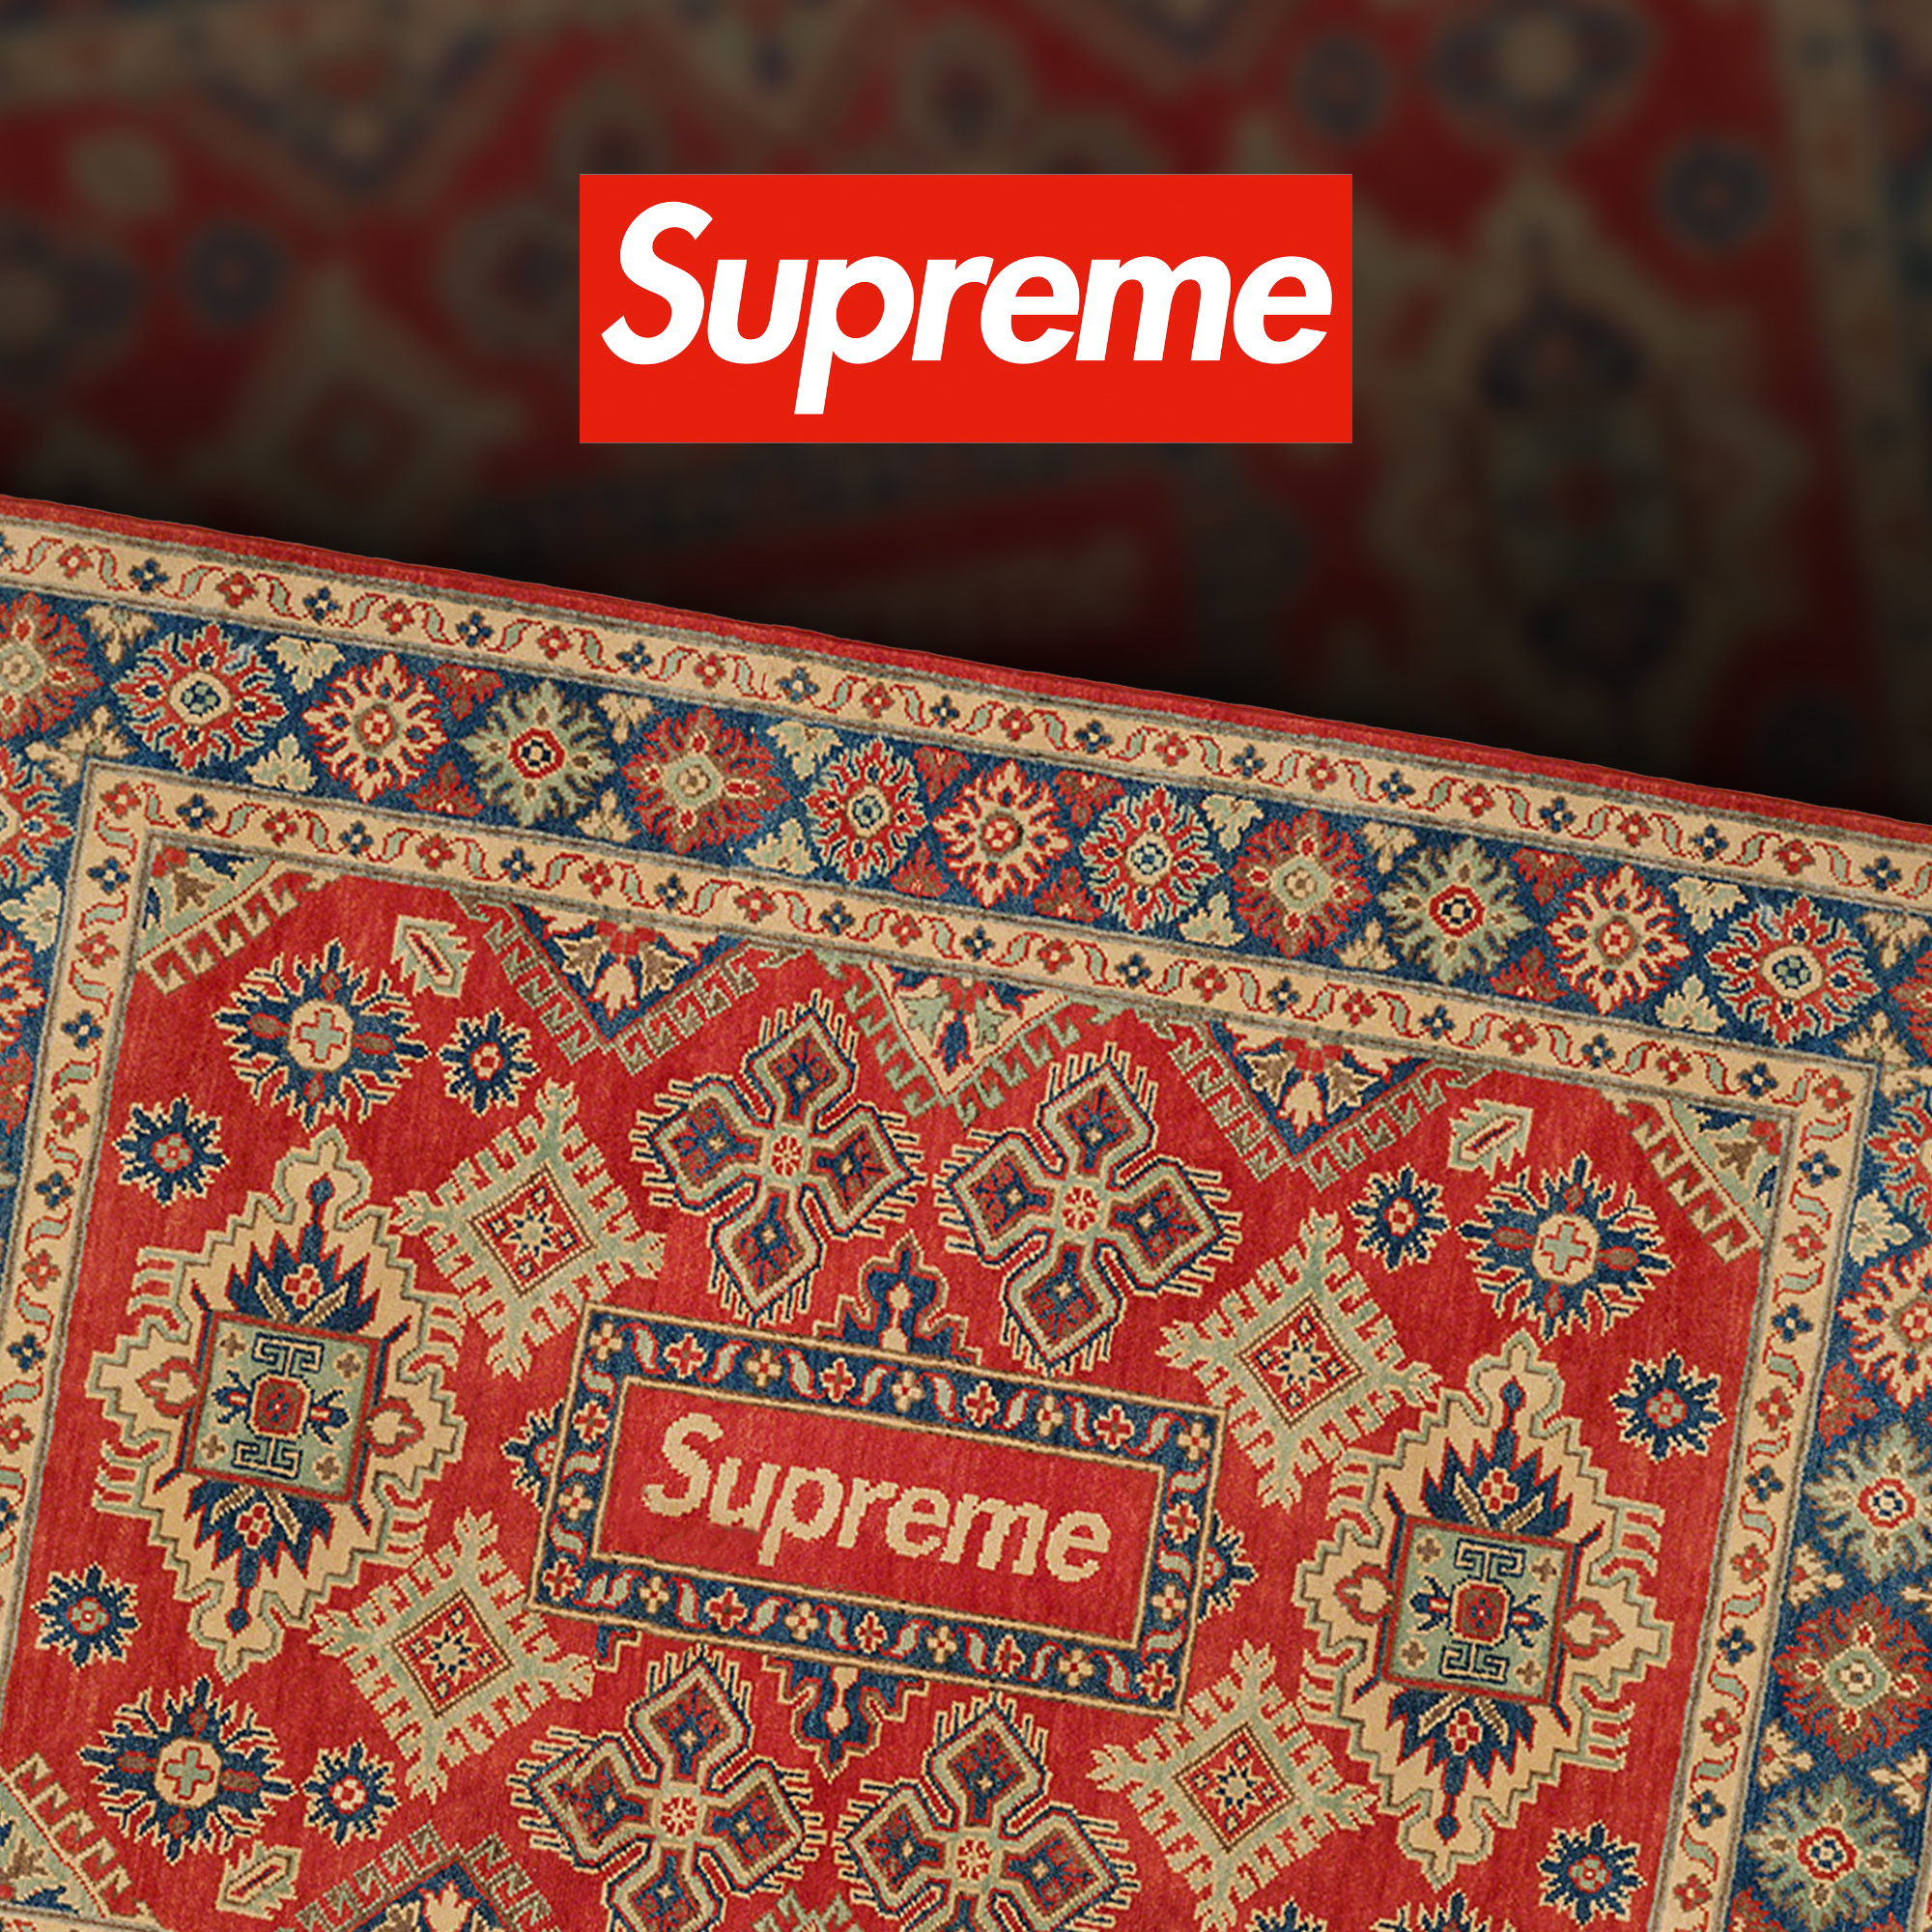 Supreme Woven Area Rug 5x7 Hand woven New Zealand wool rug is expected to  release in store and online this Thursday, May 19th. Expected…